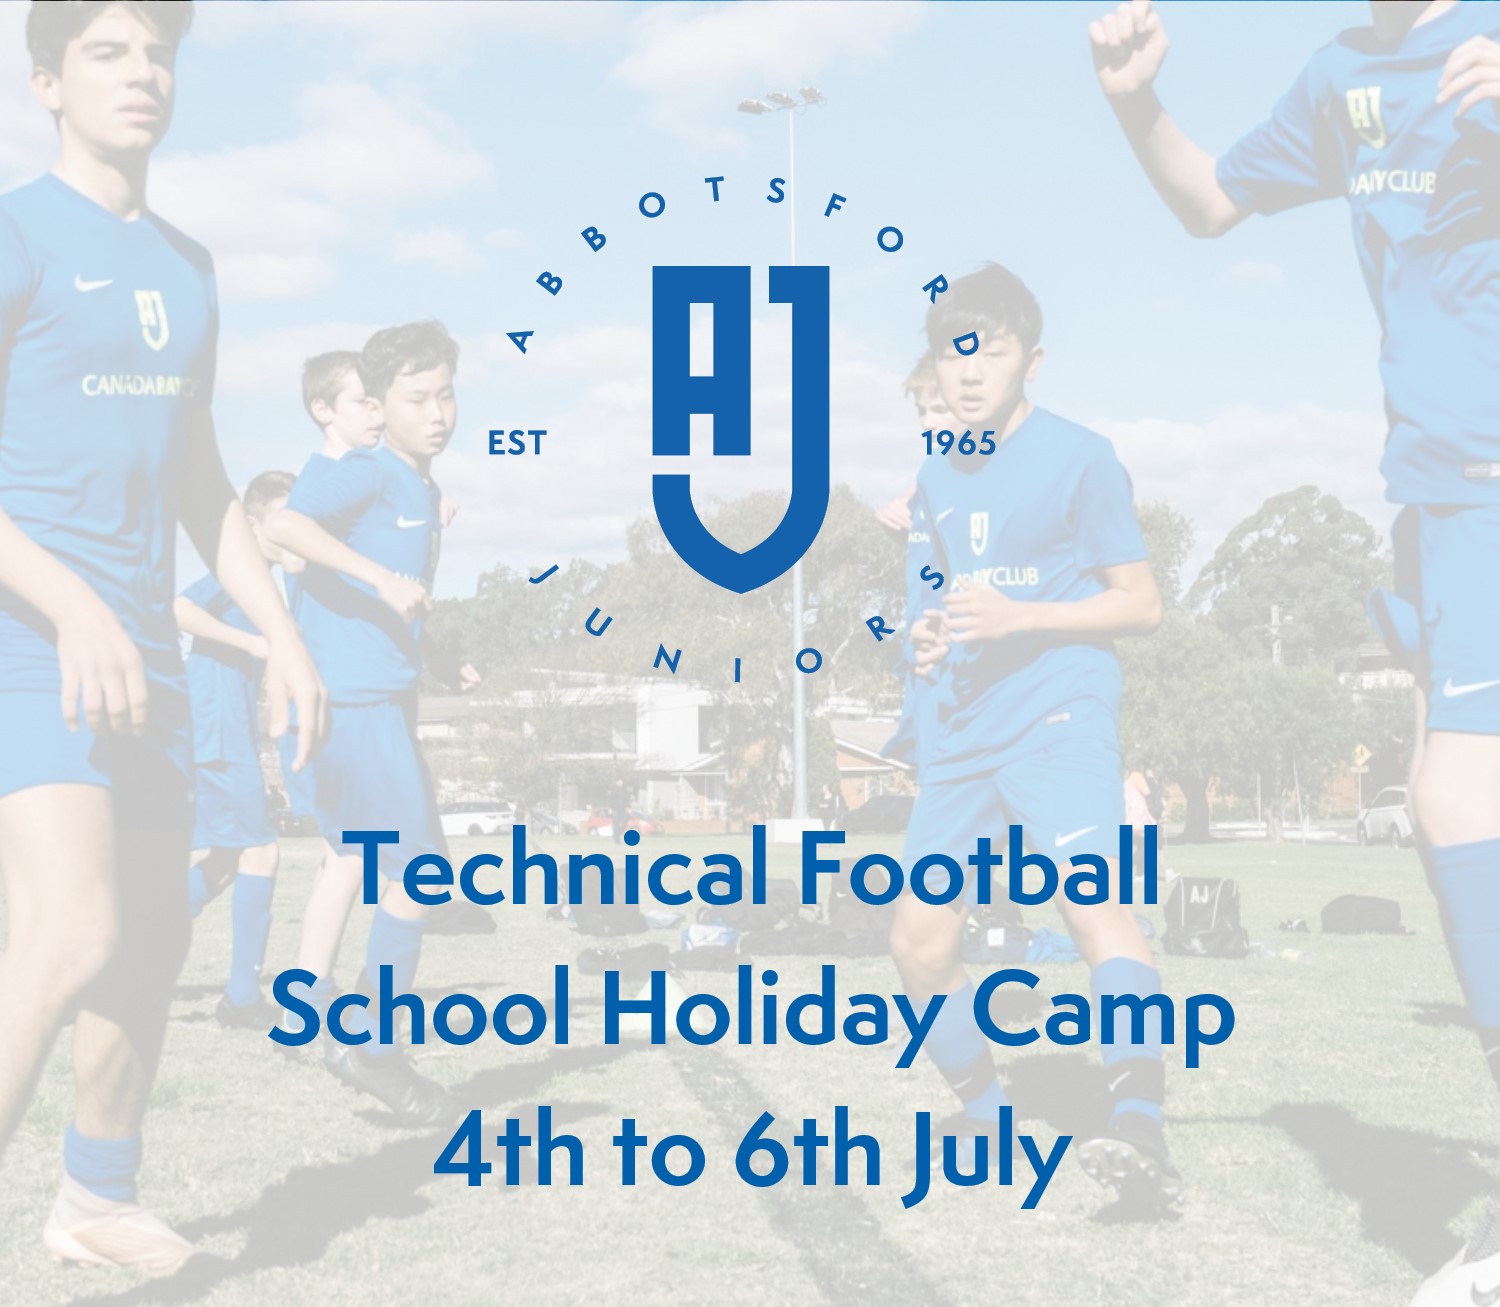 Technical Football School Holiday Camp - 4th to 6th July